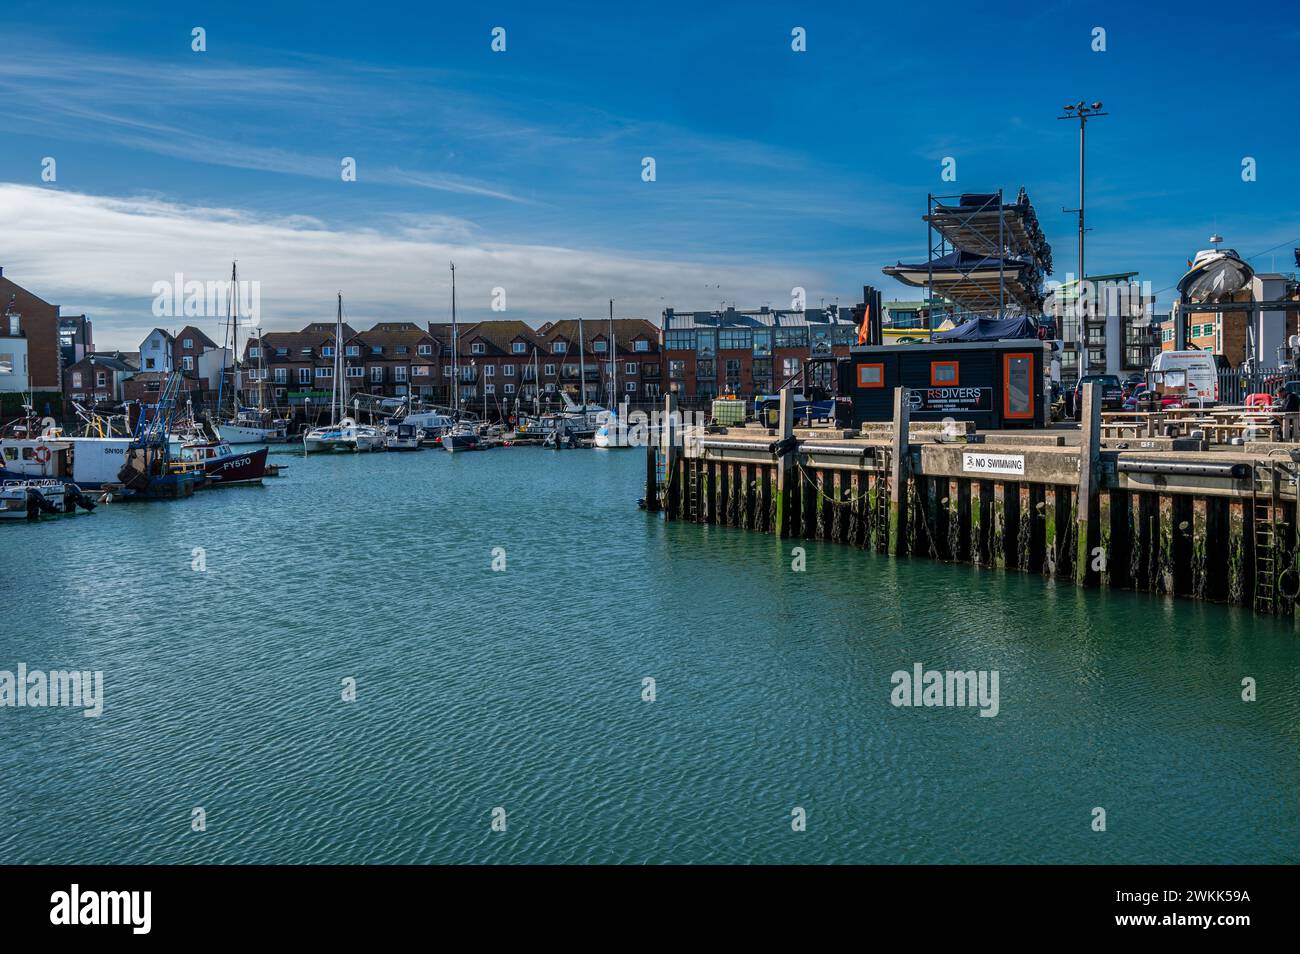 View of Camber docks, Old Portsmouth, with yachts and fishing boats in the harbour. Stock Photo